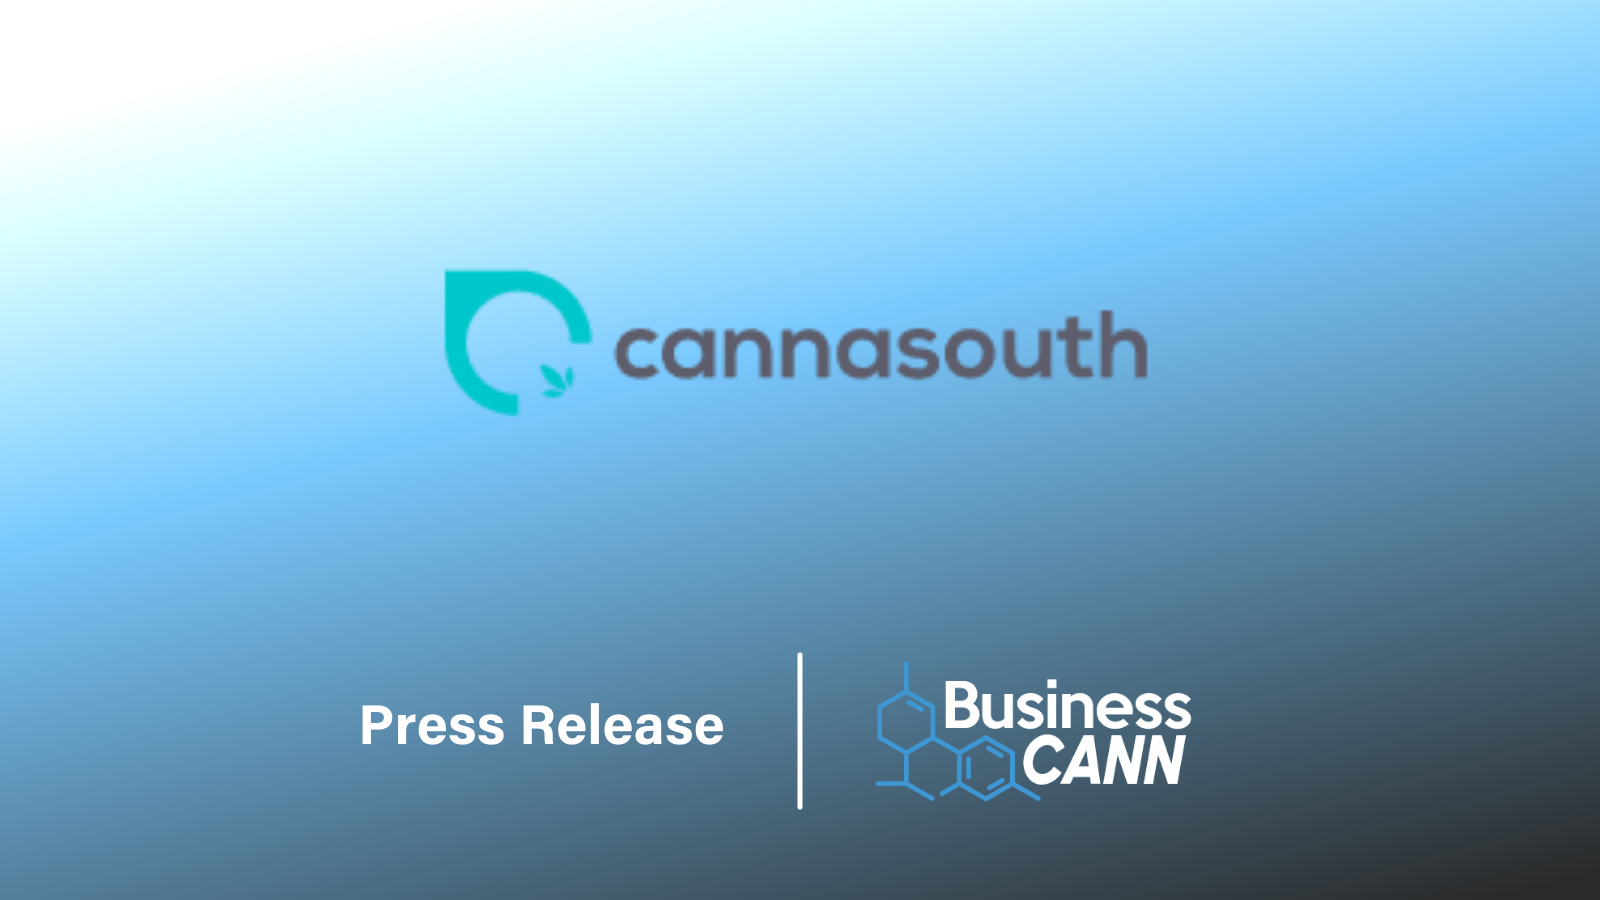 A THREE-YEAR neuropathic pain (pre-clinical) study by Cannasouth has confirmed that cannabinoids from medicinal cannabis could be effective at reducing debilitating neuropathic pain, which affects about 400,000 New Zealanders or 8 per cent of the country’s population. 